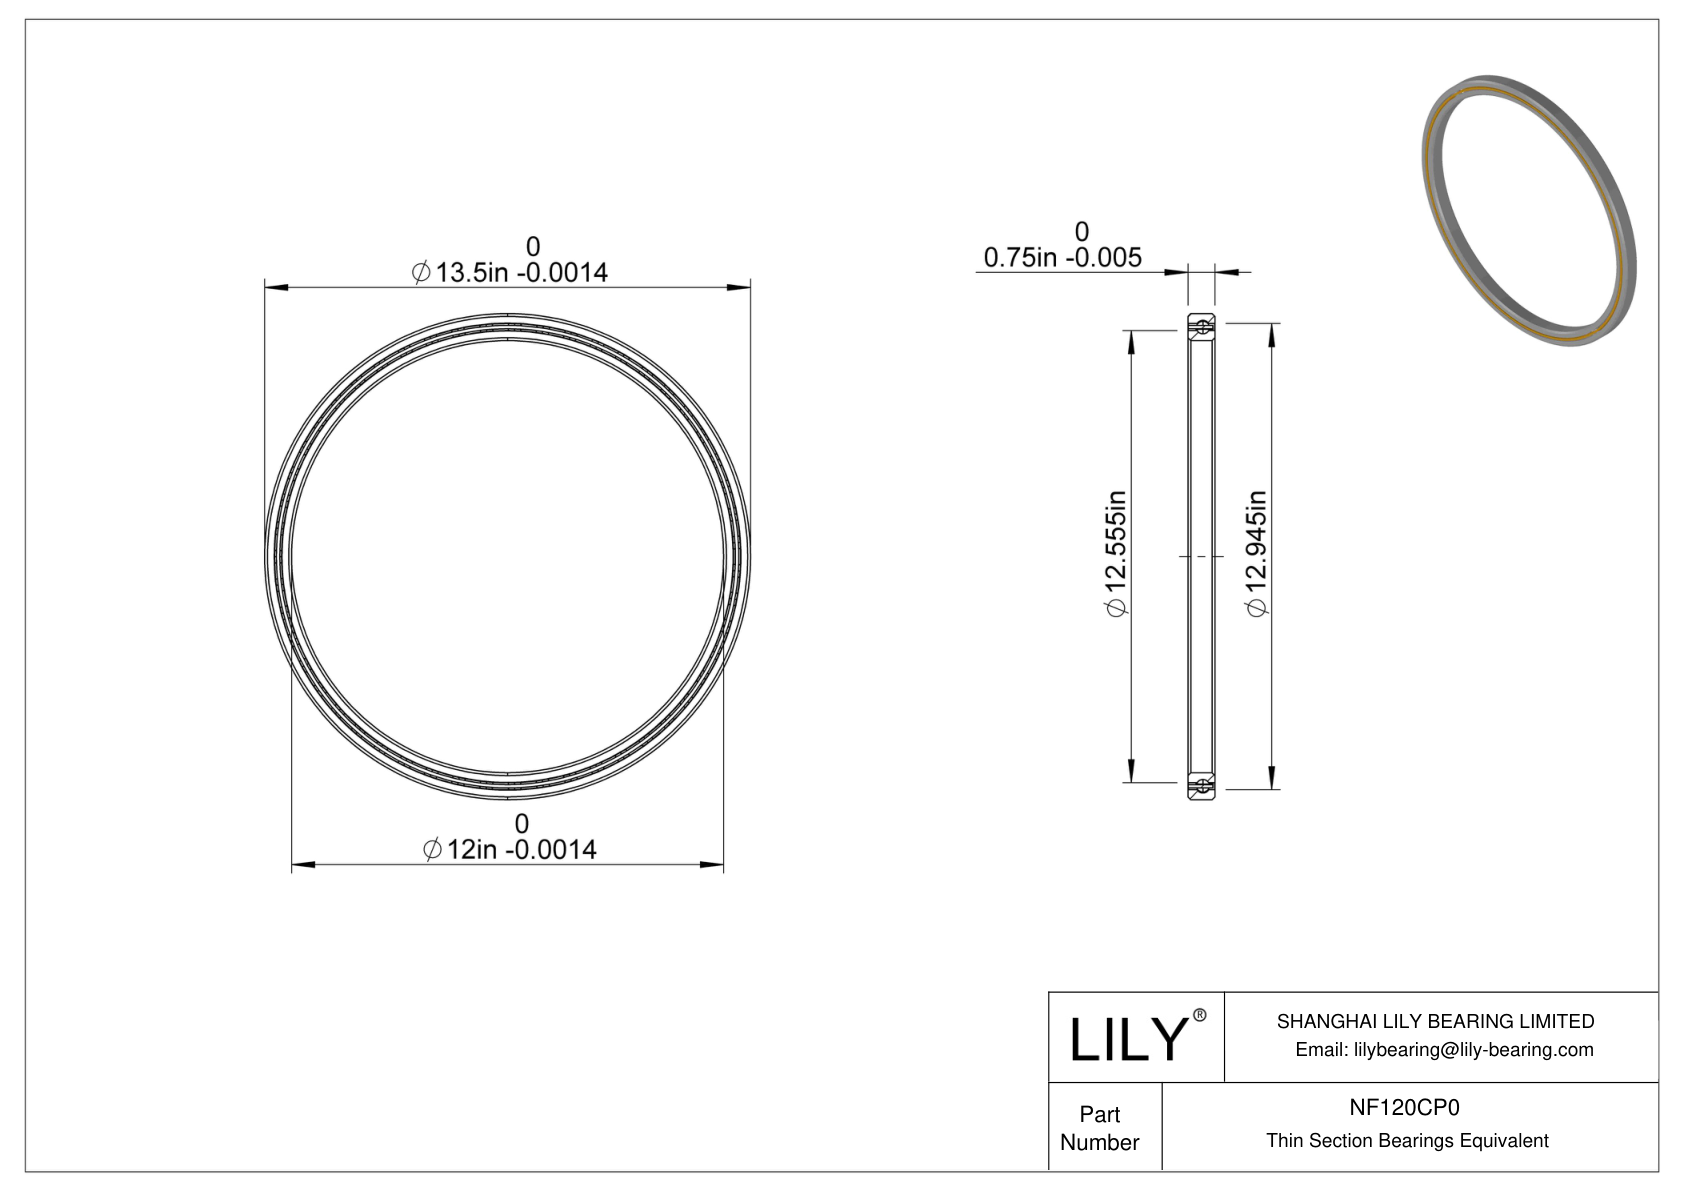 NF120CP0 Constant Section (CS) Bearings cad drawing